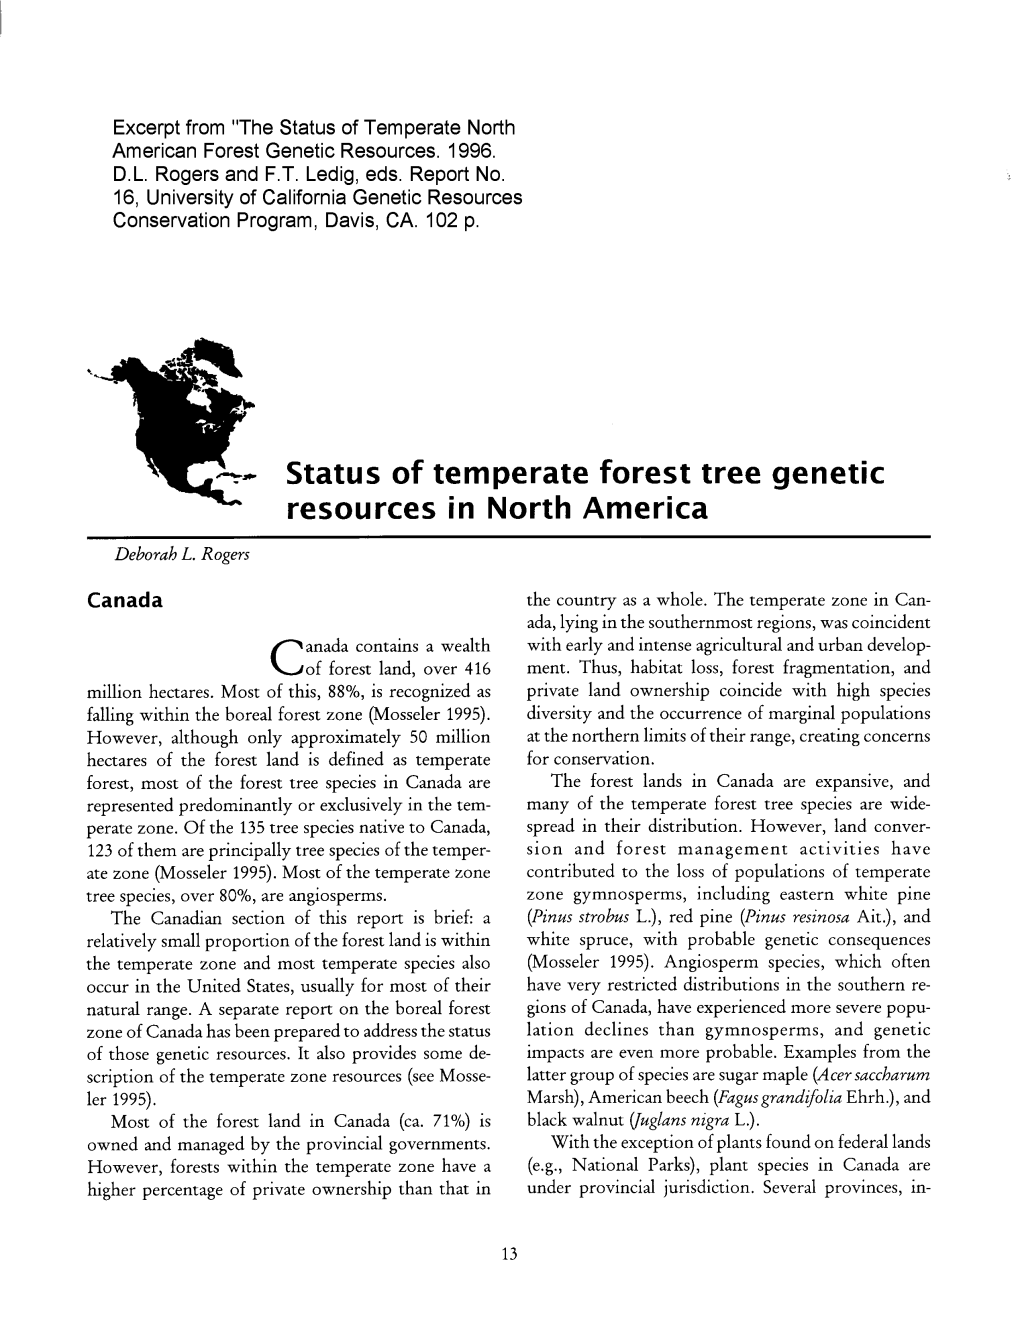 Status of Temperate Forest Tree Genetic Resources in North America